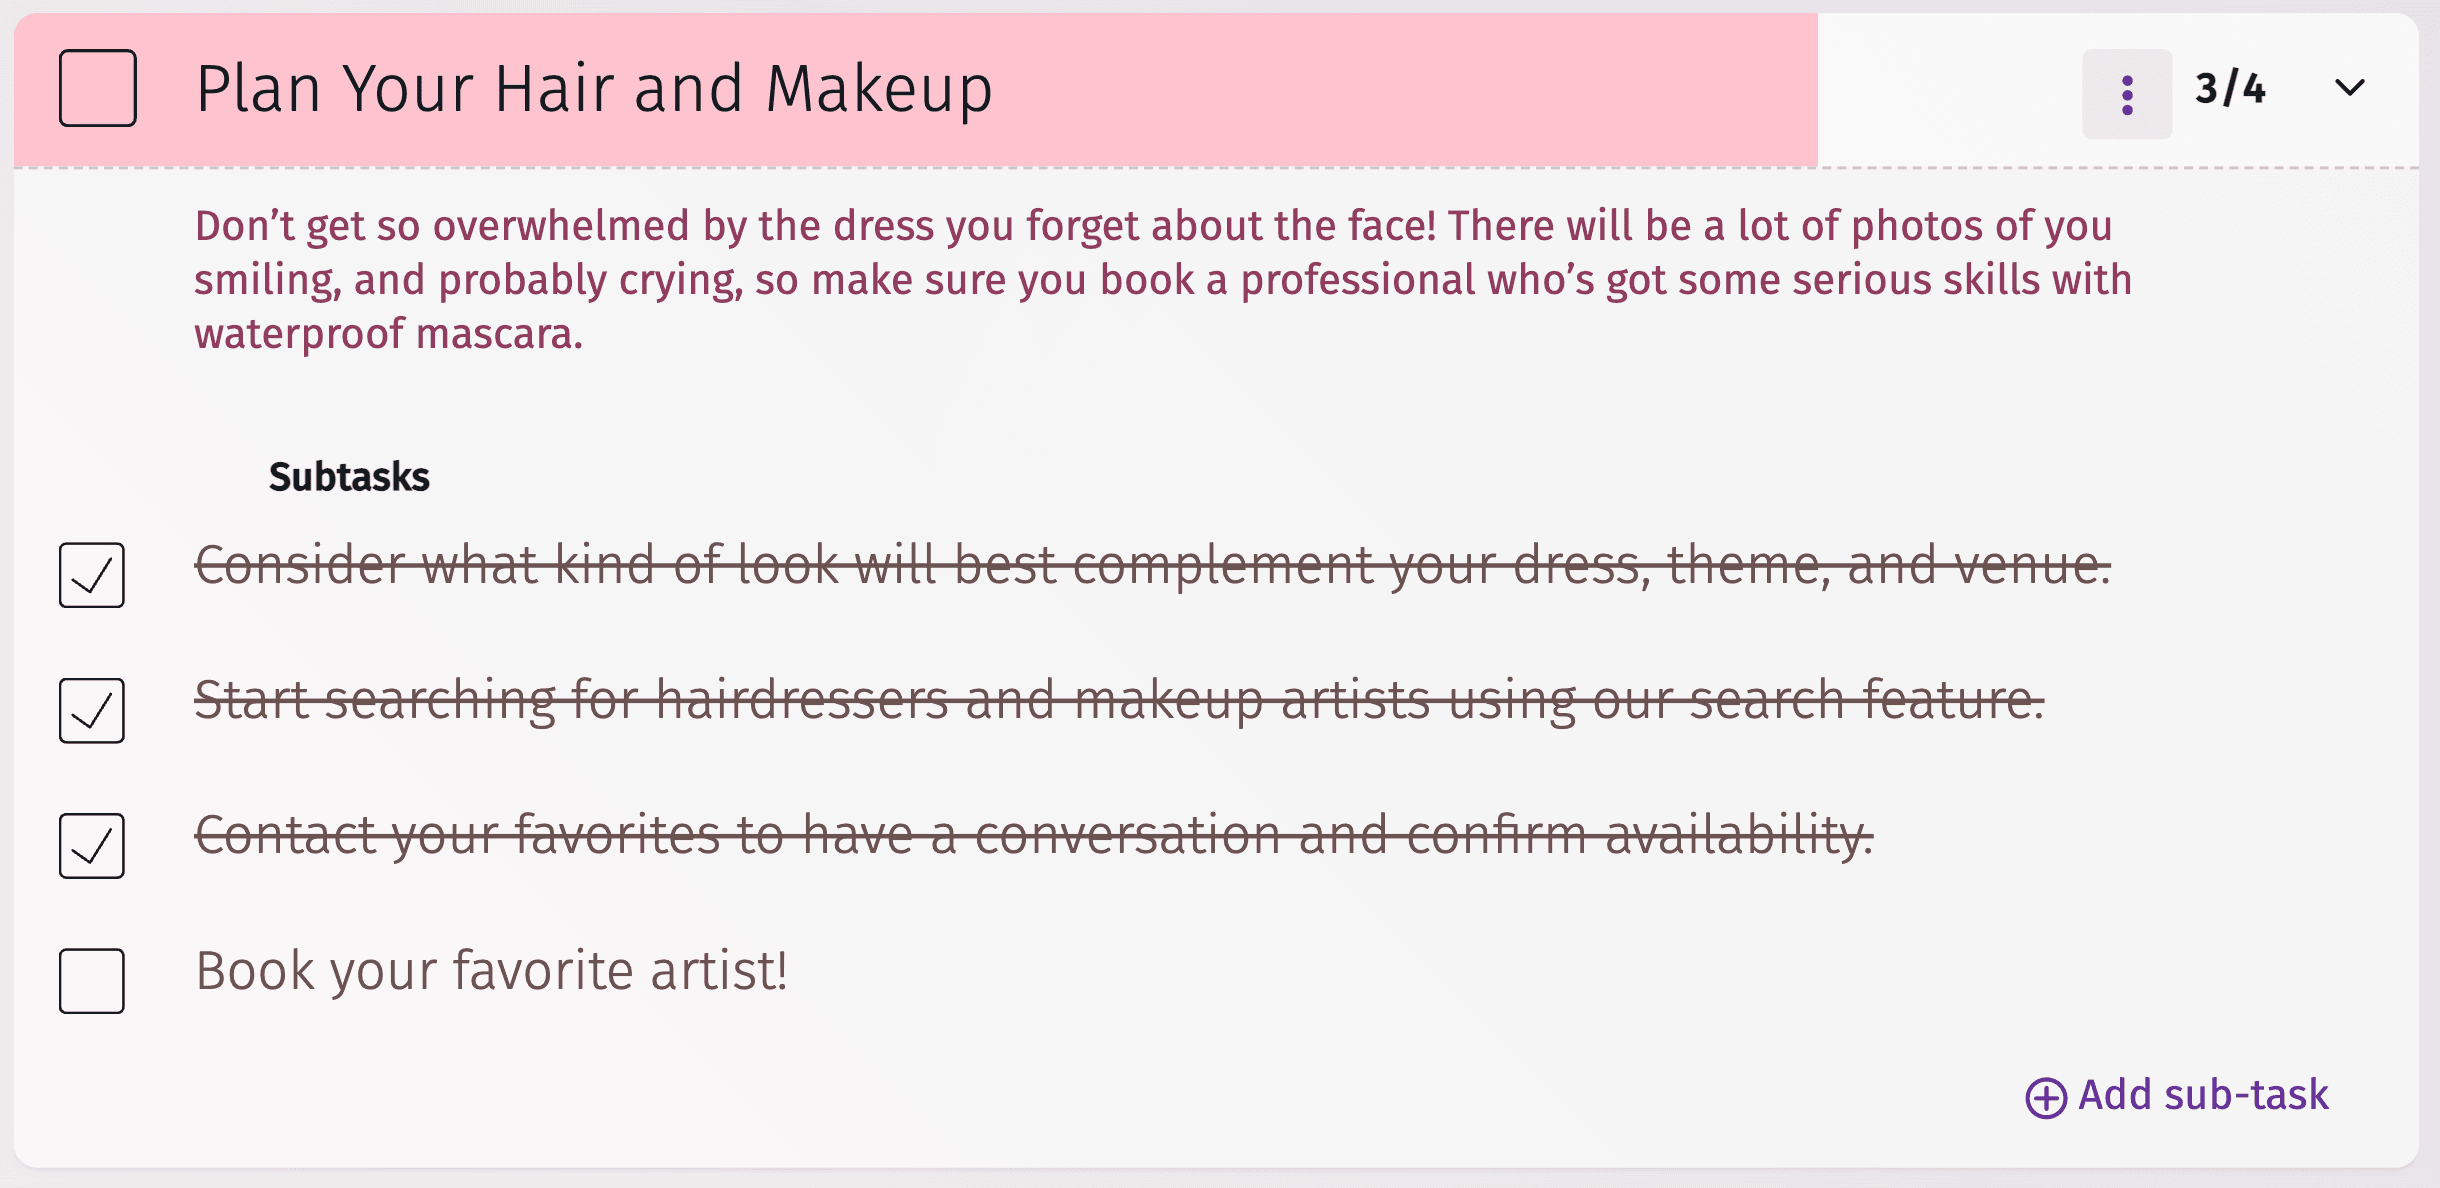 Checklist for hair and makeup